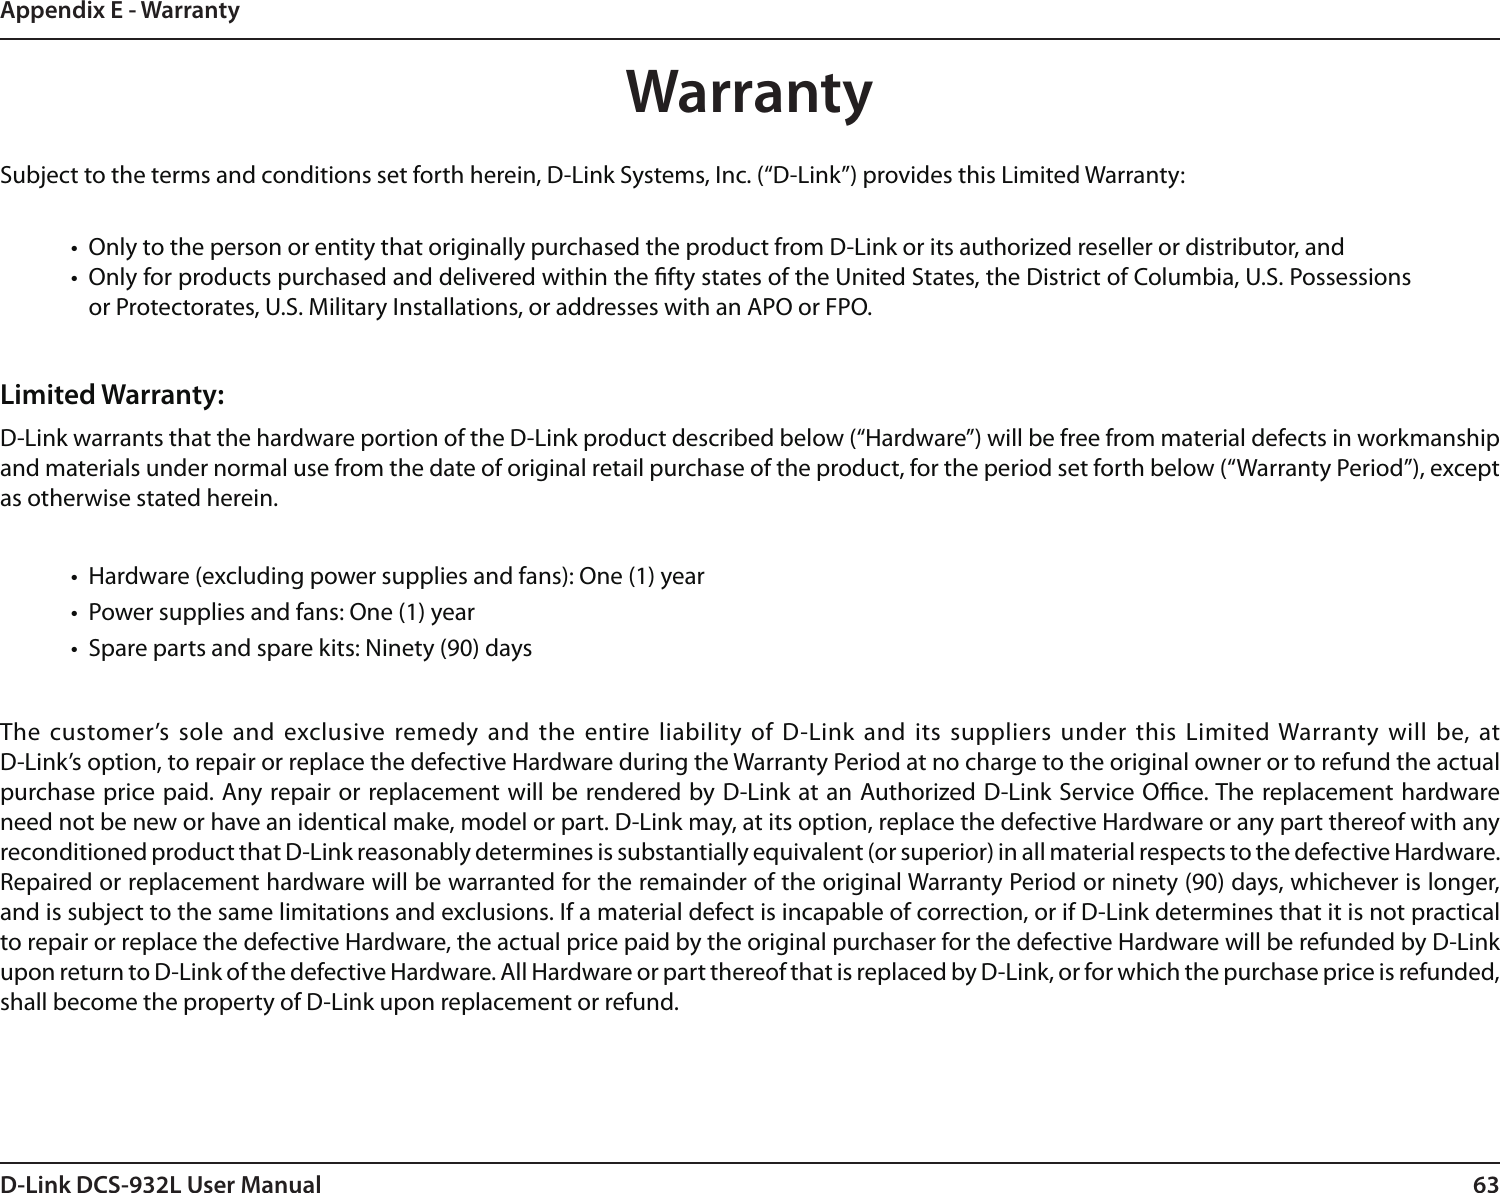 63D-Link DCS-932L User ManualAppendix E - WarrantyWarrantySubject to the terms and conditions set forth herein, D-Link Systems, Inc. (“D-Link”) provides this Limited Warranty:•  Only to the person or entity that originally purchased the product from D-Link or its authorized reseller or distributor, and•  Only for products purchased and delivered within the fty states of the United States, the District of Columbia, U.S. Possessions or Protectorates, U.S. Military Installations, or addresses with an APO or FPO.Limited Warranty:D-Link warrants that the hardware portion of the D-Link product described below (“Hardware”) will be free from material defects in workmanship and materials under normal use from the date of original retail purchase of the product, for the period set forth below (“Warranty Period”), except as otherwise stated herein.•  Hardware (excluding power supplies and fans): One (1) year•  Power supplies and fans: One (1) year•  Spare parts and spare kits: Ninety (90) daysThe customer’s sole  and  exclusive remedy and  the  entire liability of D-Link  and  its suppliers under this Limited Warranty  will be, at  D-Link’s option, to repair or replace the defective Hardware during the Warranty Period at no charge to the original owner or to refund the actual purchase price paid. Any repair or replacement will be  rendered by D-Link at an Authorized D-Link Service Oce. The replacement hardware need not be new or have an identical make, model or part. D-Link may, at its option, replace the defective Hardware or any part thereof with any reconditioned product that D-Link reasonably determines is substantially equivalent (or superior) in all material respects to the defective Hardware. Repaired or replacement hardware will be warranted for the remainder of the original Warranty Period or ninety (90) days, whichever is longer, and is subject to the same limitations and exclusions. If a material defect is incapable of correction, or if D-Link determines that it is not practical to repair or replace the defective Hardware, the actual price paid by the original purchaser for the defective Hardware will be refunded by D-Link upon return to D-Link of the defective Hardware. All Hardware or part thereof that is replaced by D-Link, or for which the purchase price is refunded, shall become the property of D-Link upon replacement or refund.